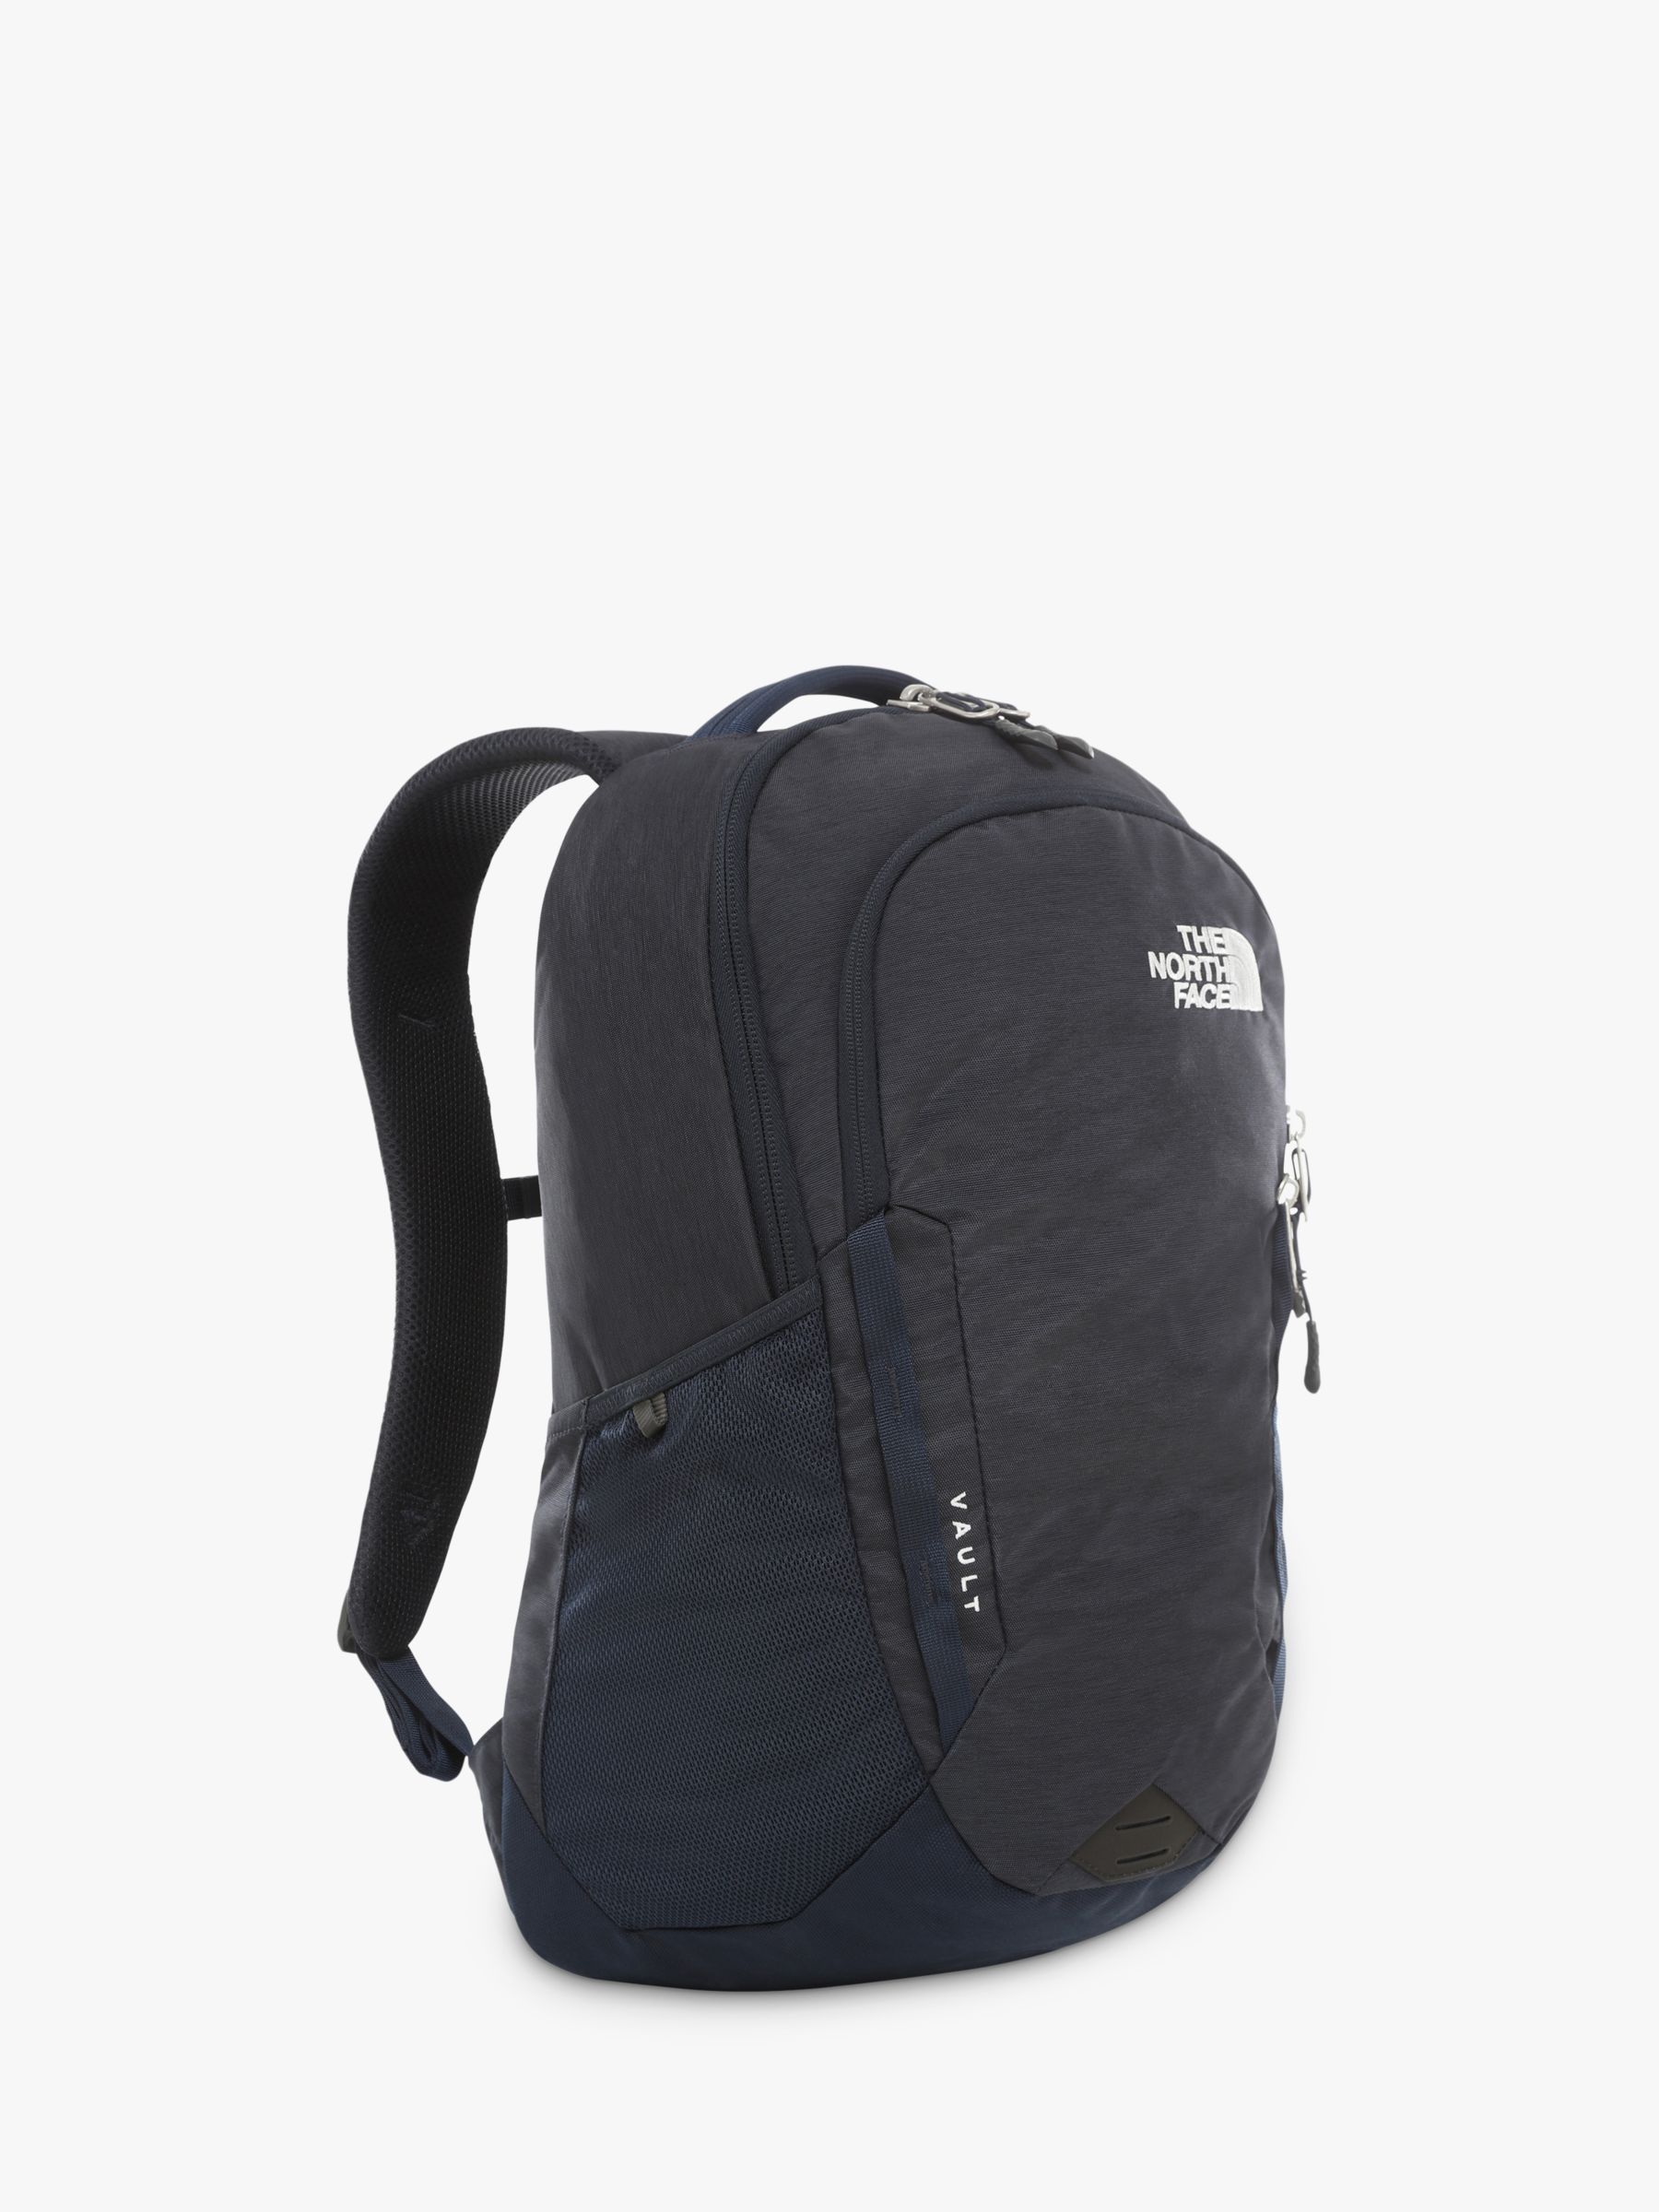 the north face vault backpack